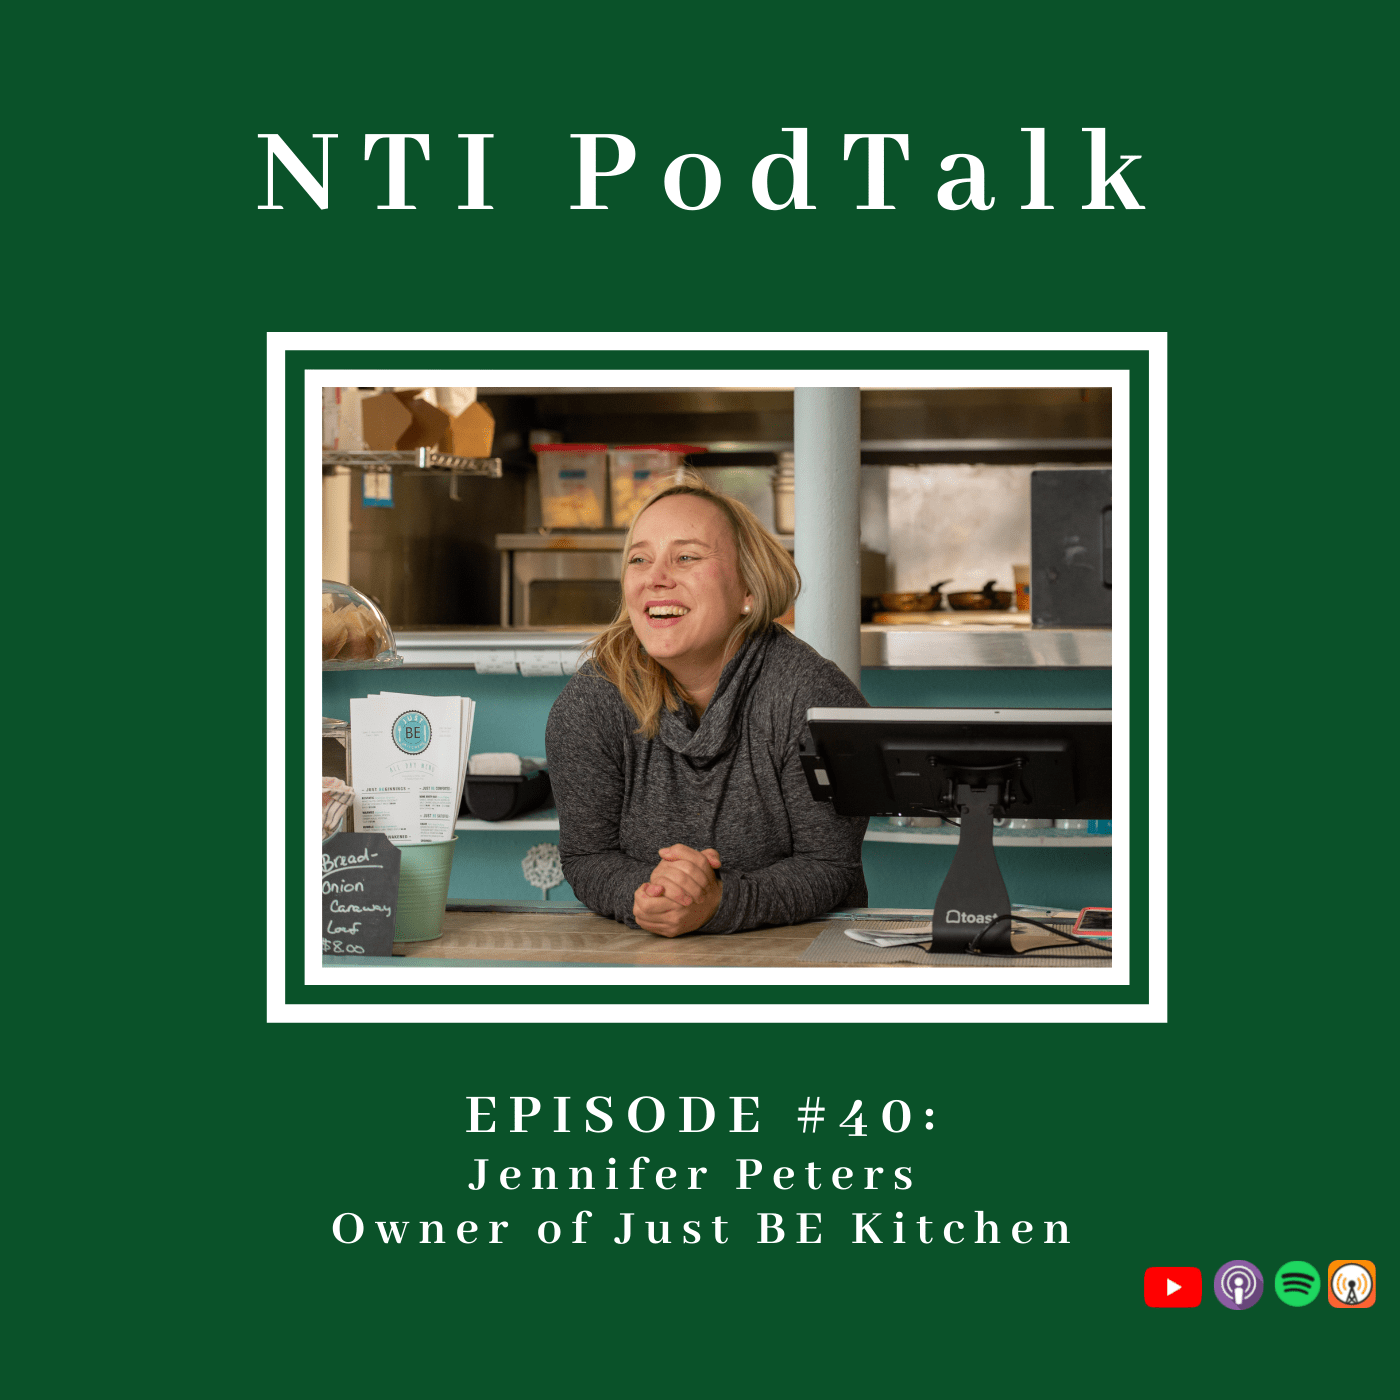 Featured image for “NTI PodTalk with Jennifer Peters, Owner of Just Be Kitchen”